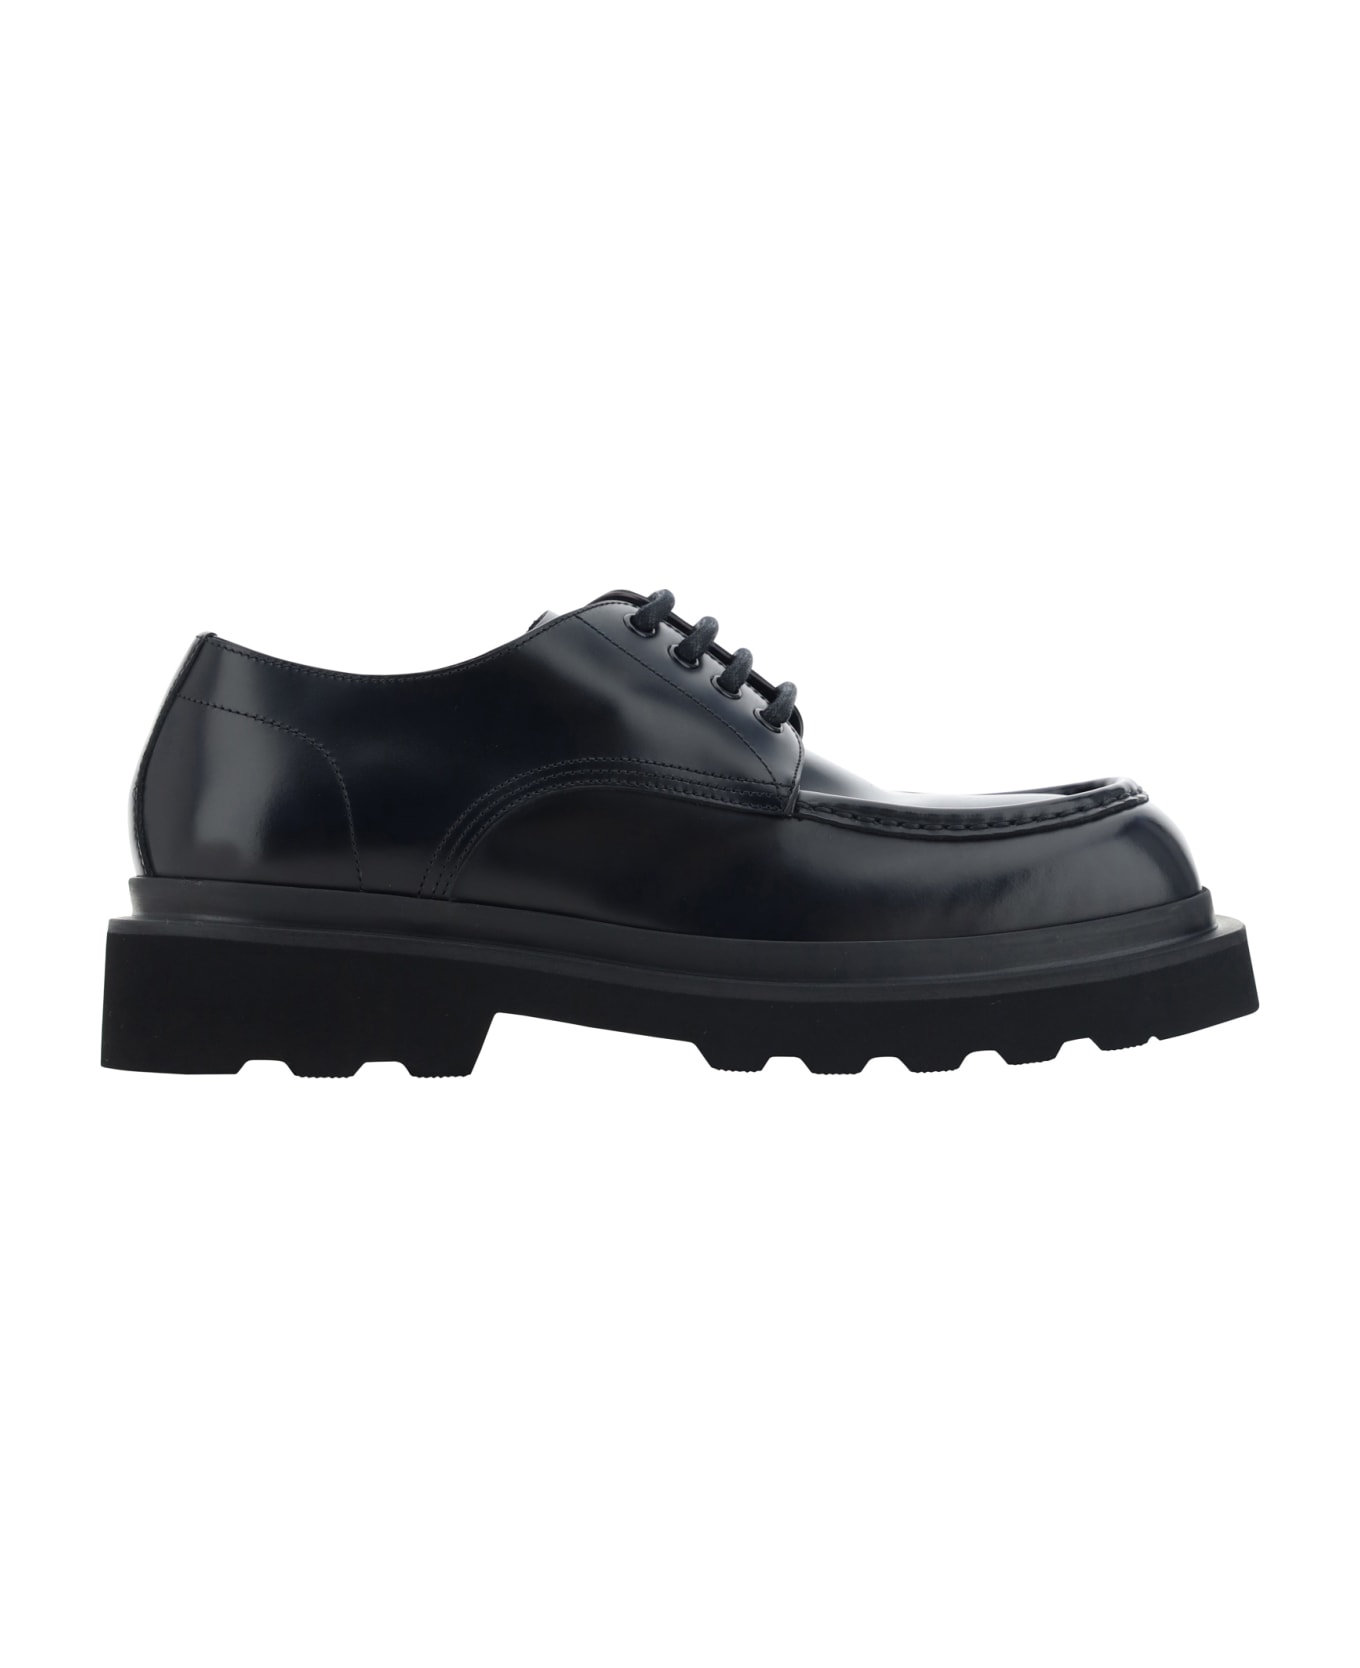 Dolce & Gabbana Derby Lace Up Shoes - Nero